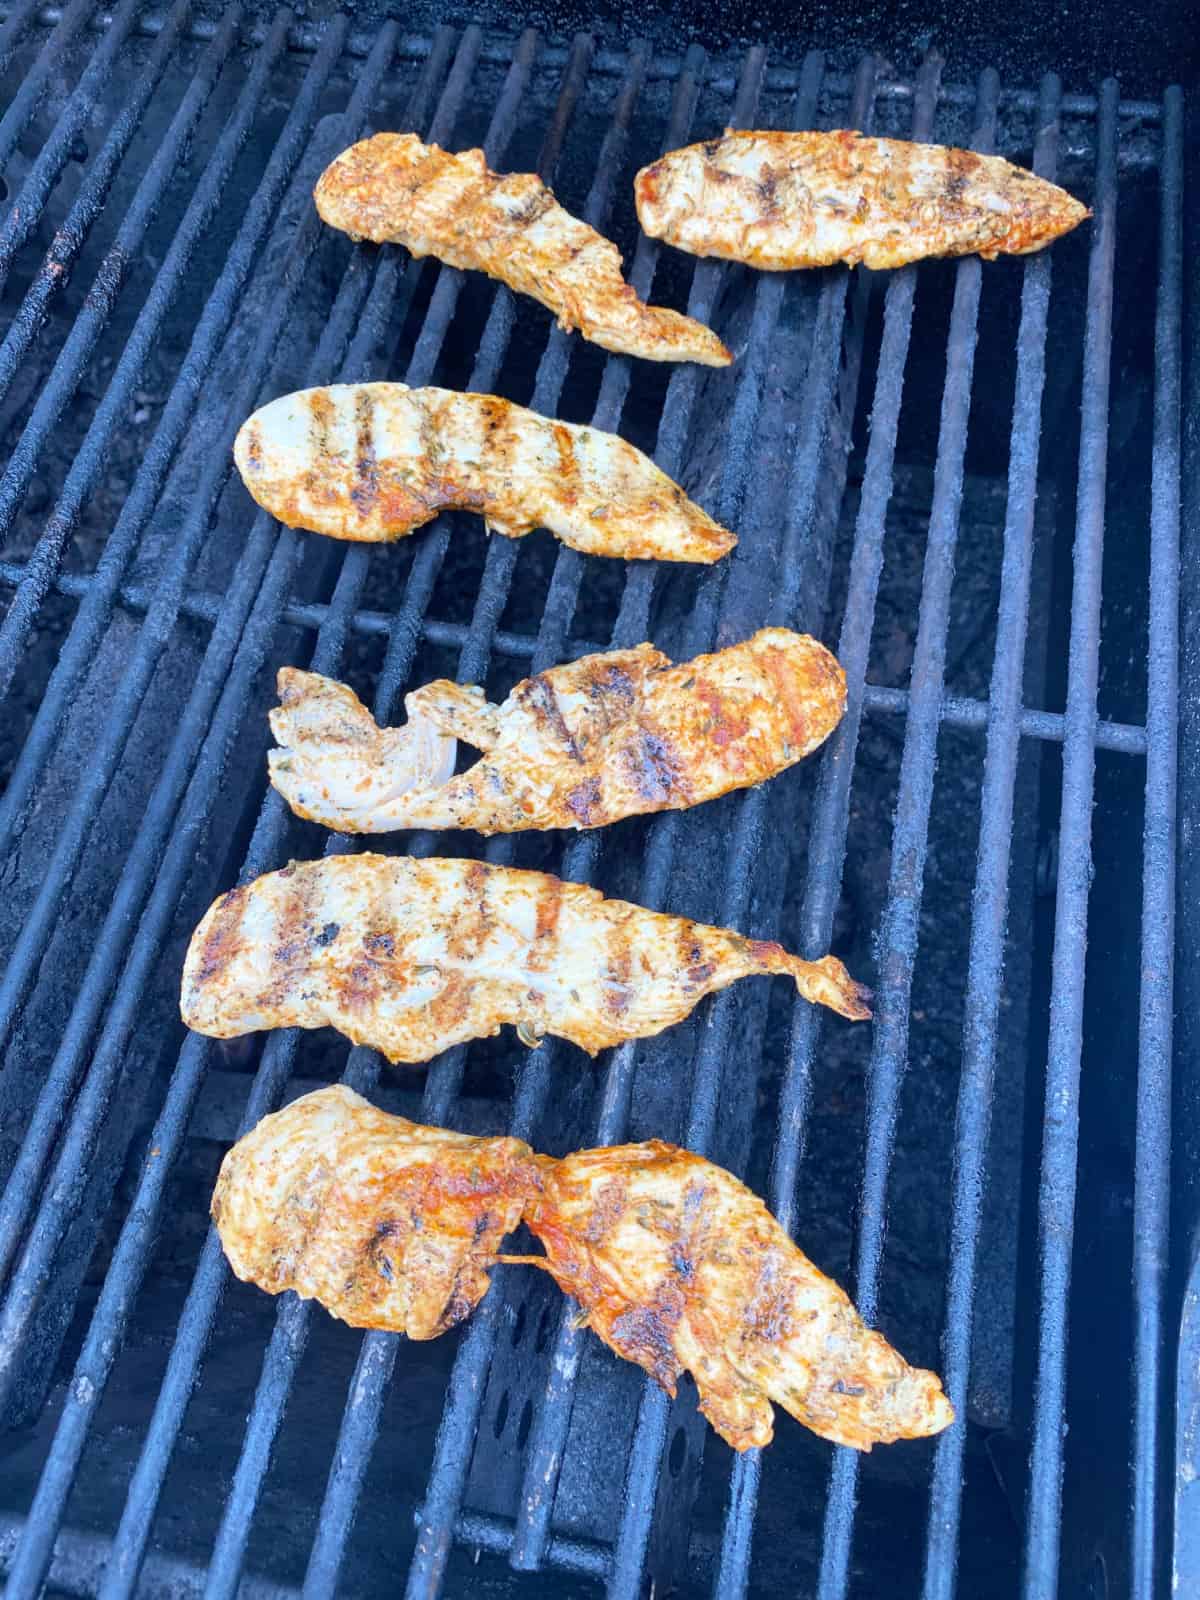 Chicken strips cooked on the grill with grill marks.